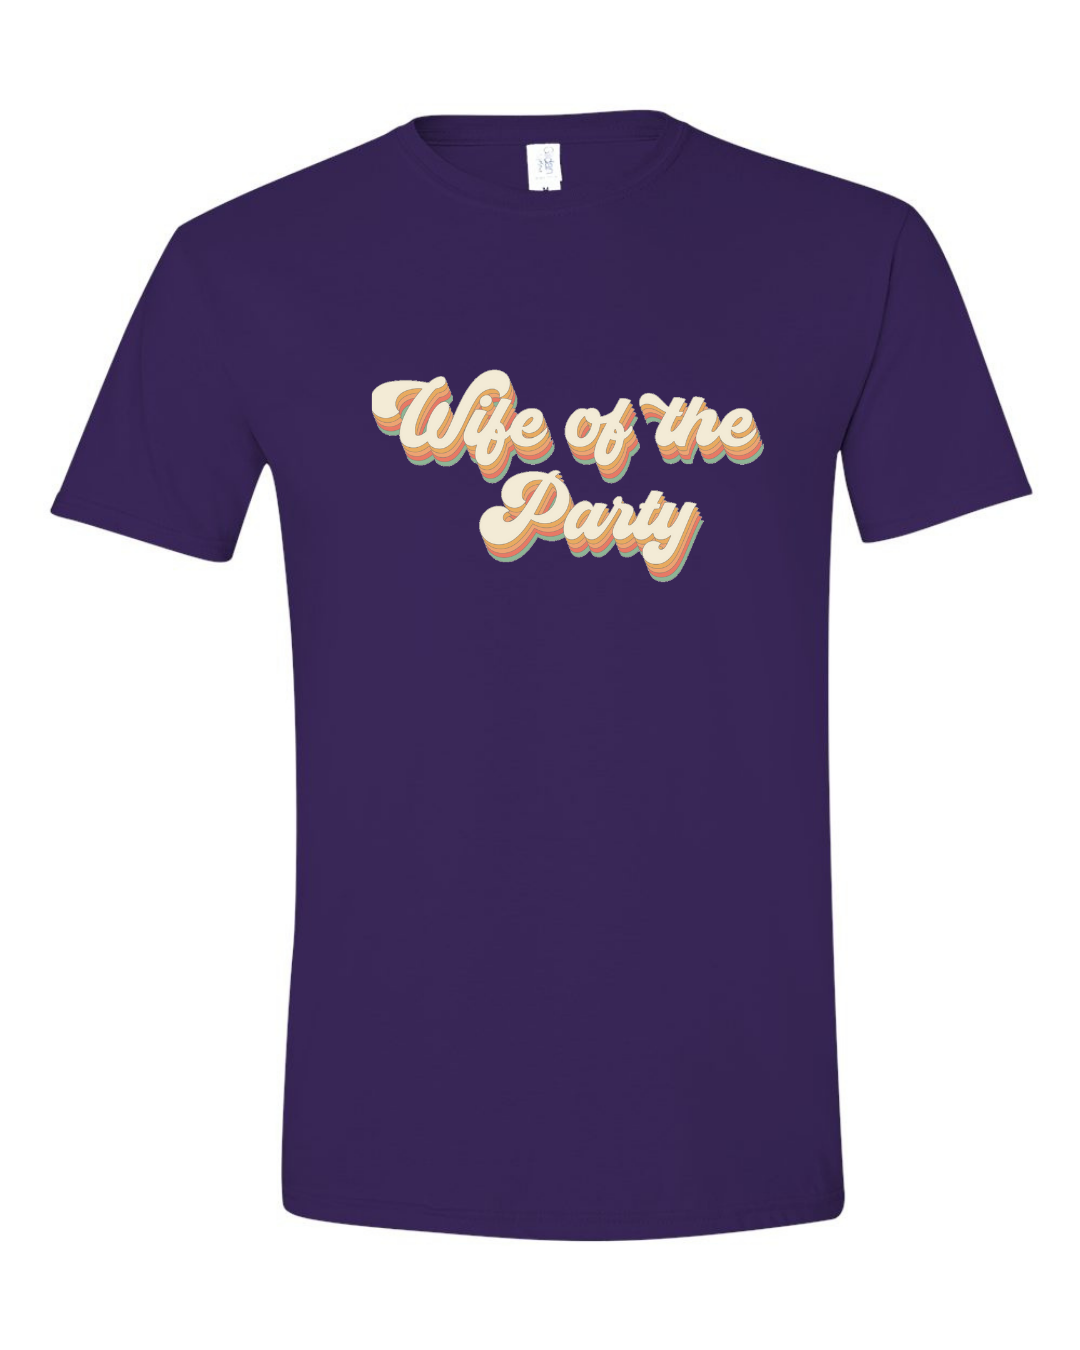 ADULT Unisex T-Shirt BBWA025 WIFE OF THE PARTY